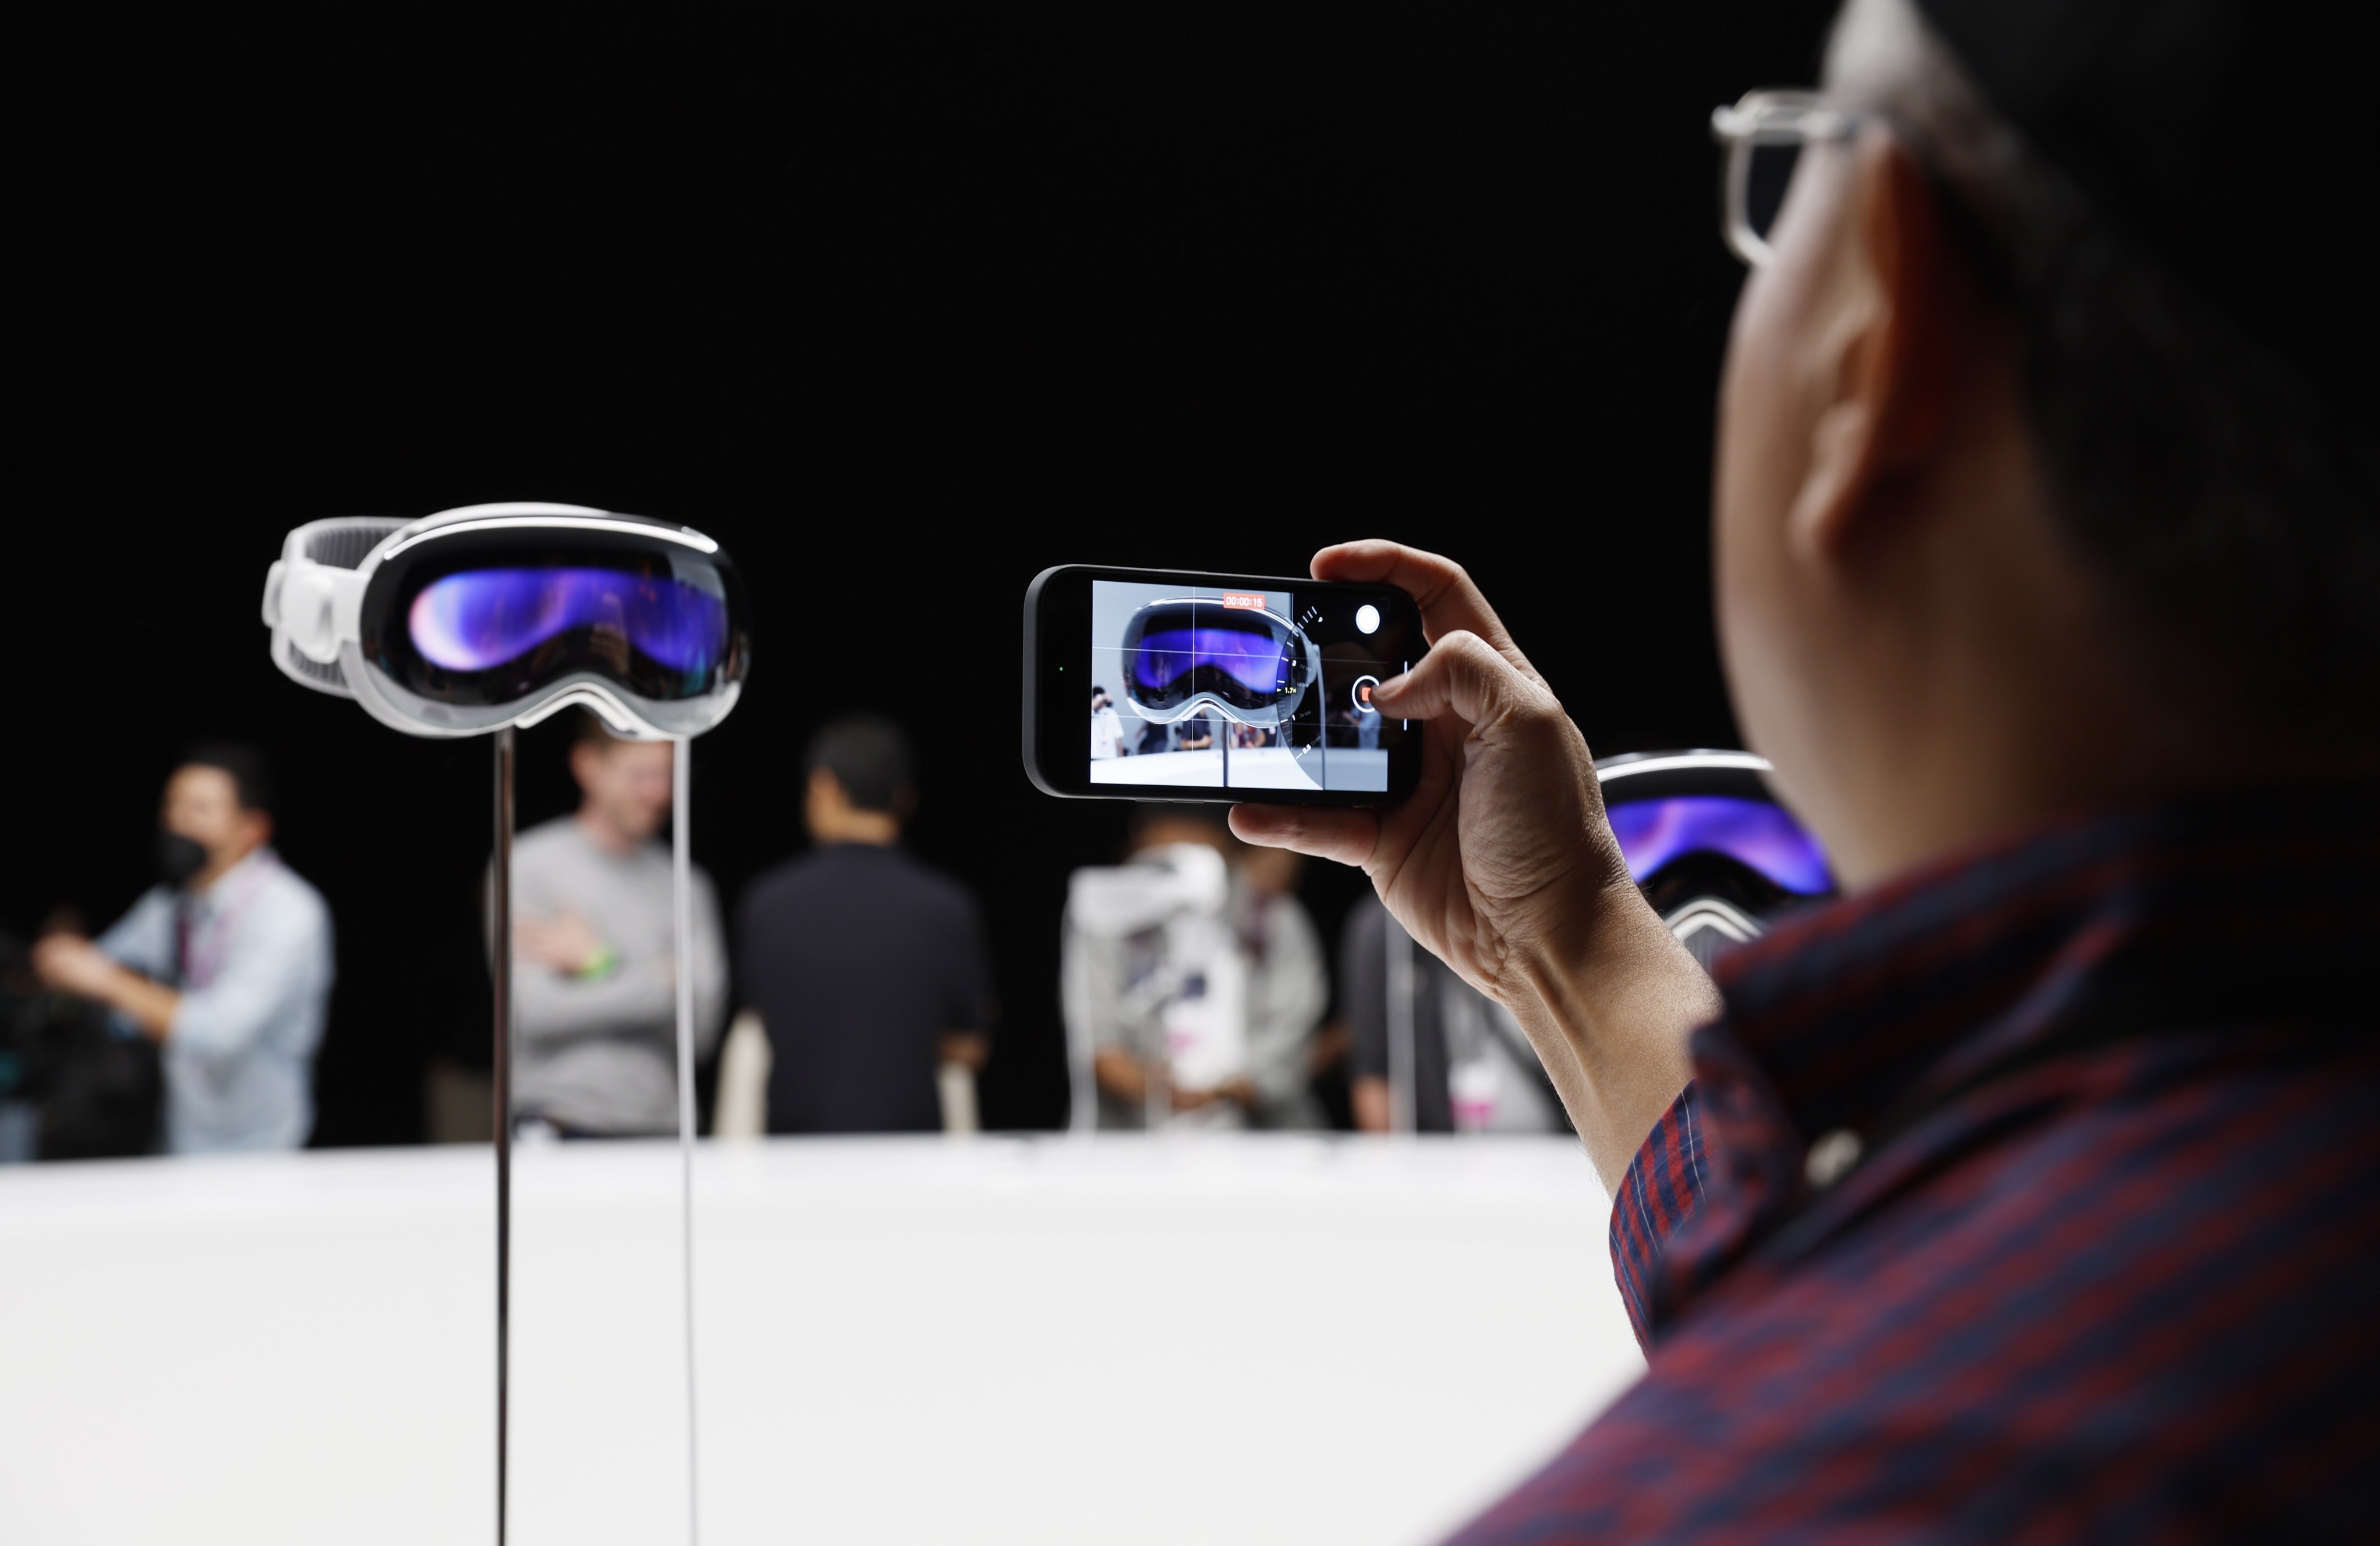 Apple’s new Vision Pro mixed-reality headset is seen on display during the company’s Worldwide Developers Conference, held at the Apple Park campus in Cupertino, California, on June 5, 2023. Photo: EPA-EFE